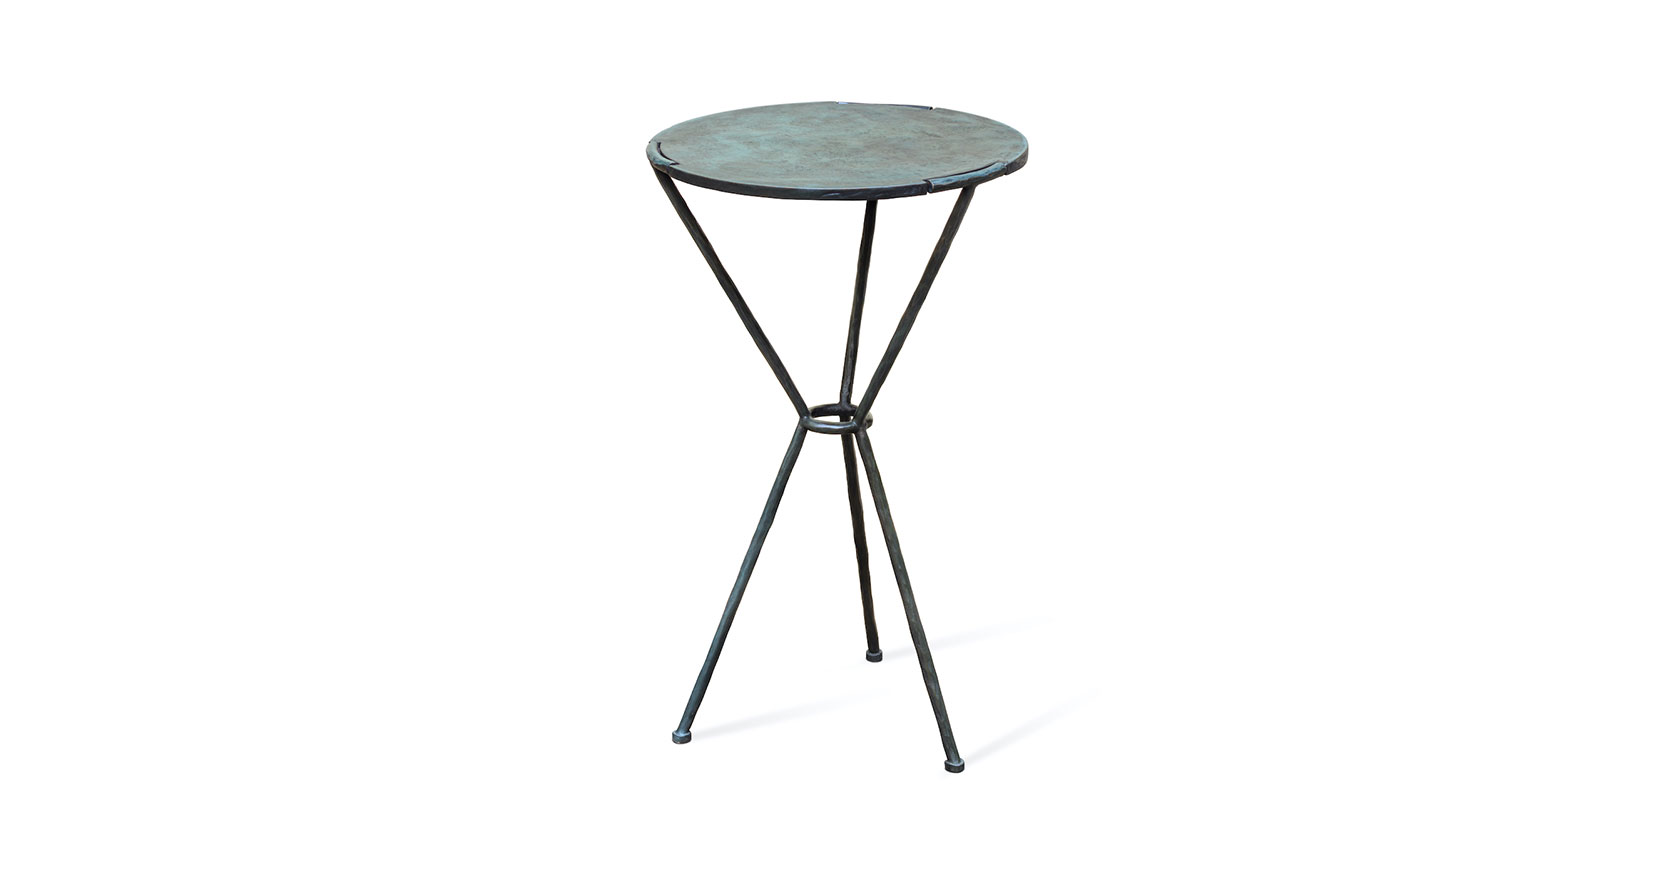 Mattia Bonetti, round pedestal table in dark green bronze, with 3 legs joined at mid-height which flare out to hold the sculpted top